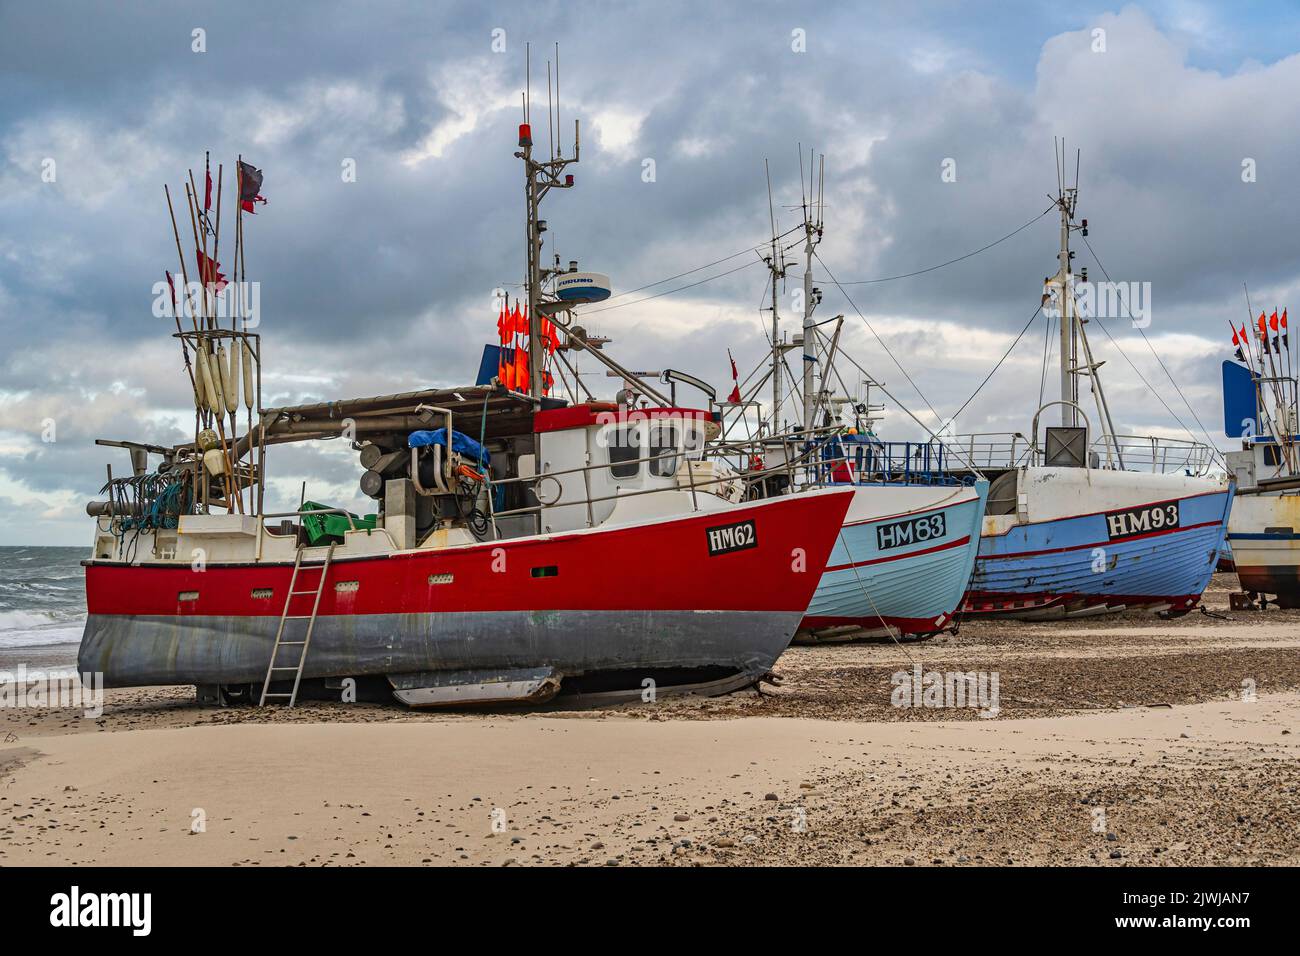 Fishing boats pulled ashore awaiting the storm. In the small fishing village of Thorupstrand, sustainable fishing is practiced. Jammerbugt, Denmark Stock Photo